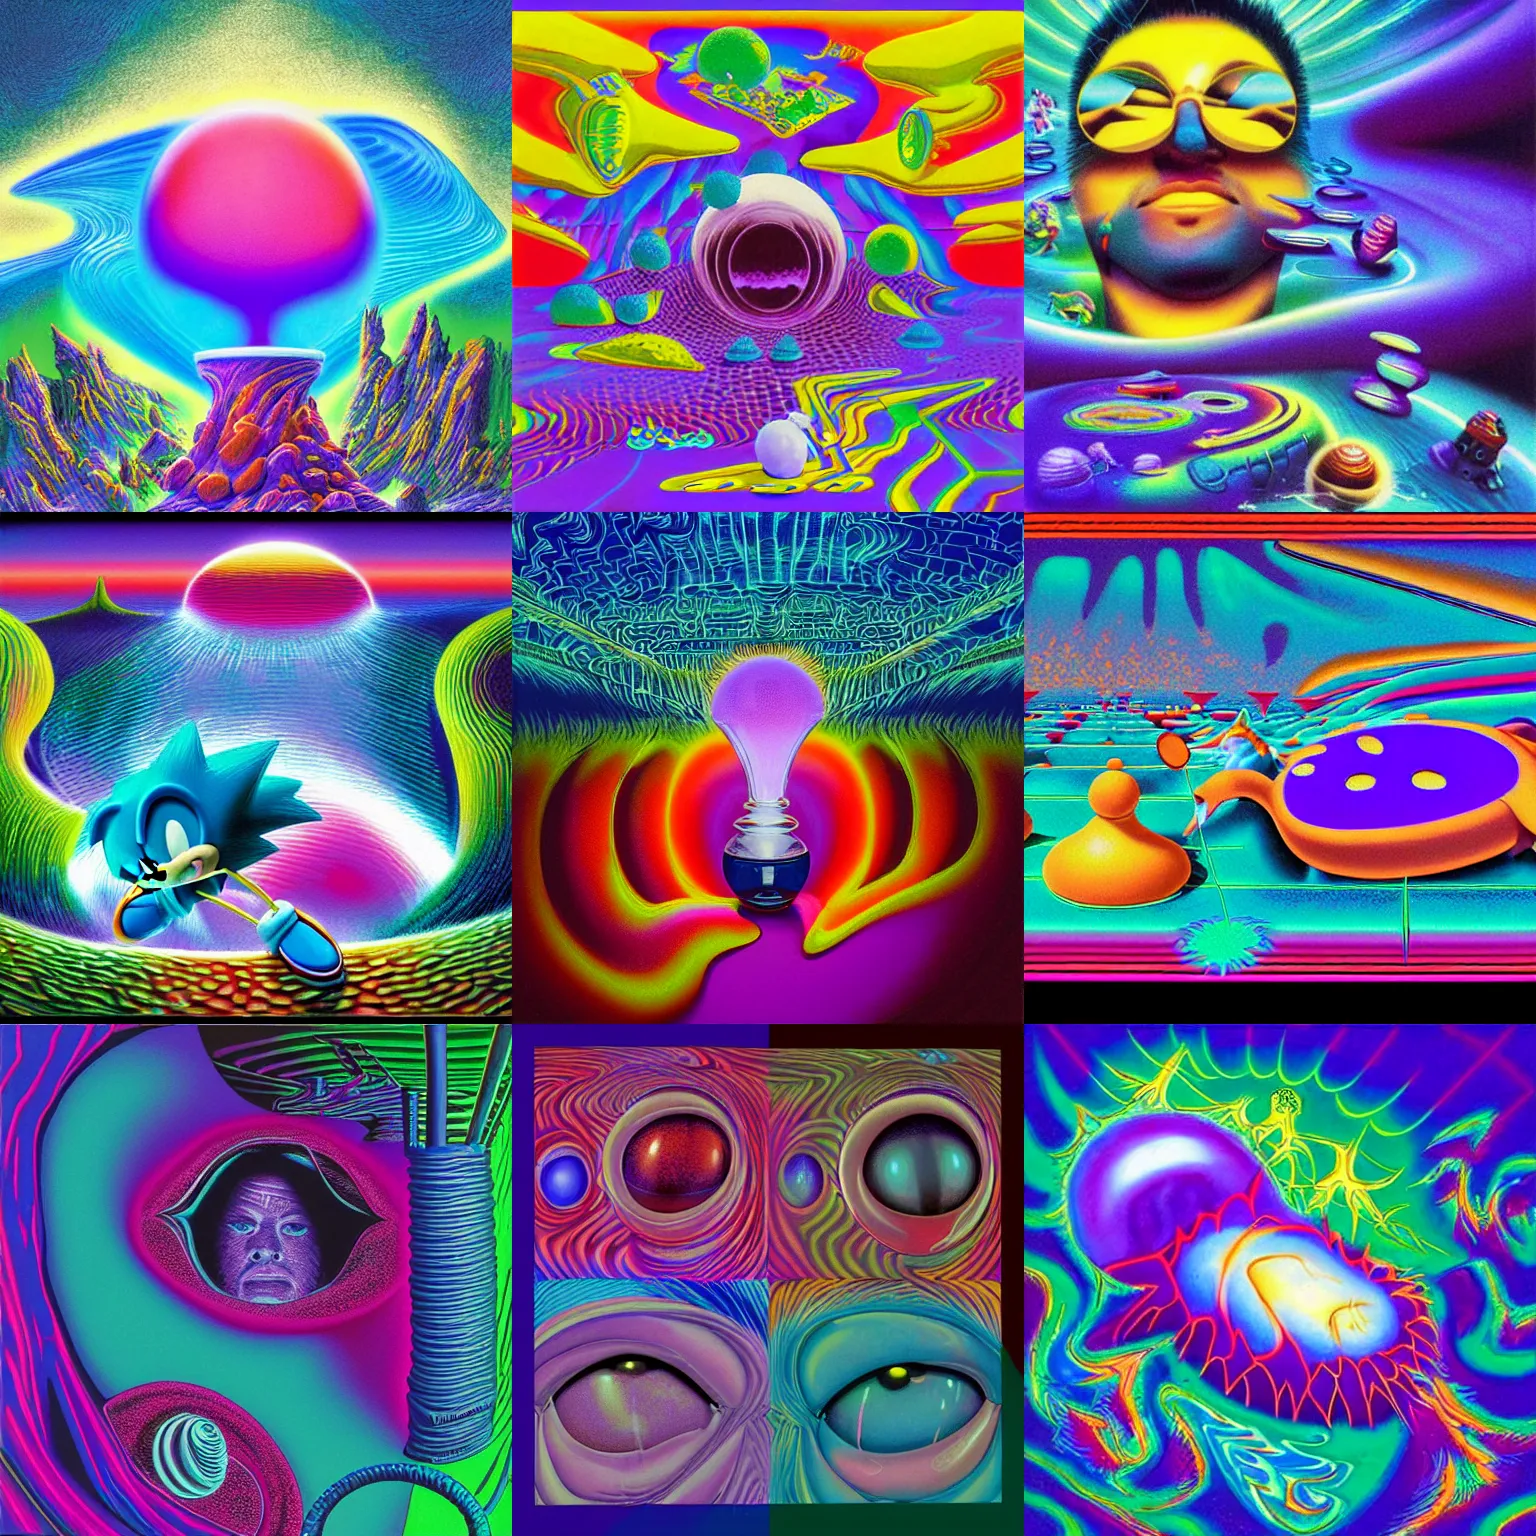 Prompt: dreaming of closeup sonic hedgehog portrait lava lamp claymation scifi matte painting landscape of a surreal alex grey, retro moulded professional soft pastels high quality airbrush art album cover of a liquid dissolving airbrush art lsd sonic the hedgehog swimming through cyberspace purple teal checkerboard background 1 9 8 0 s 1 9 8 2 sega genesis video game album cover